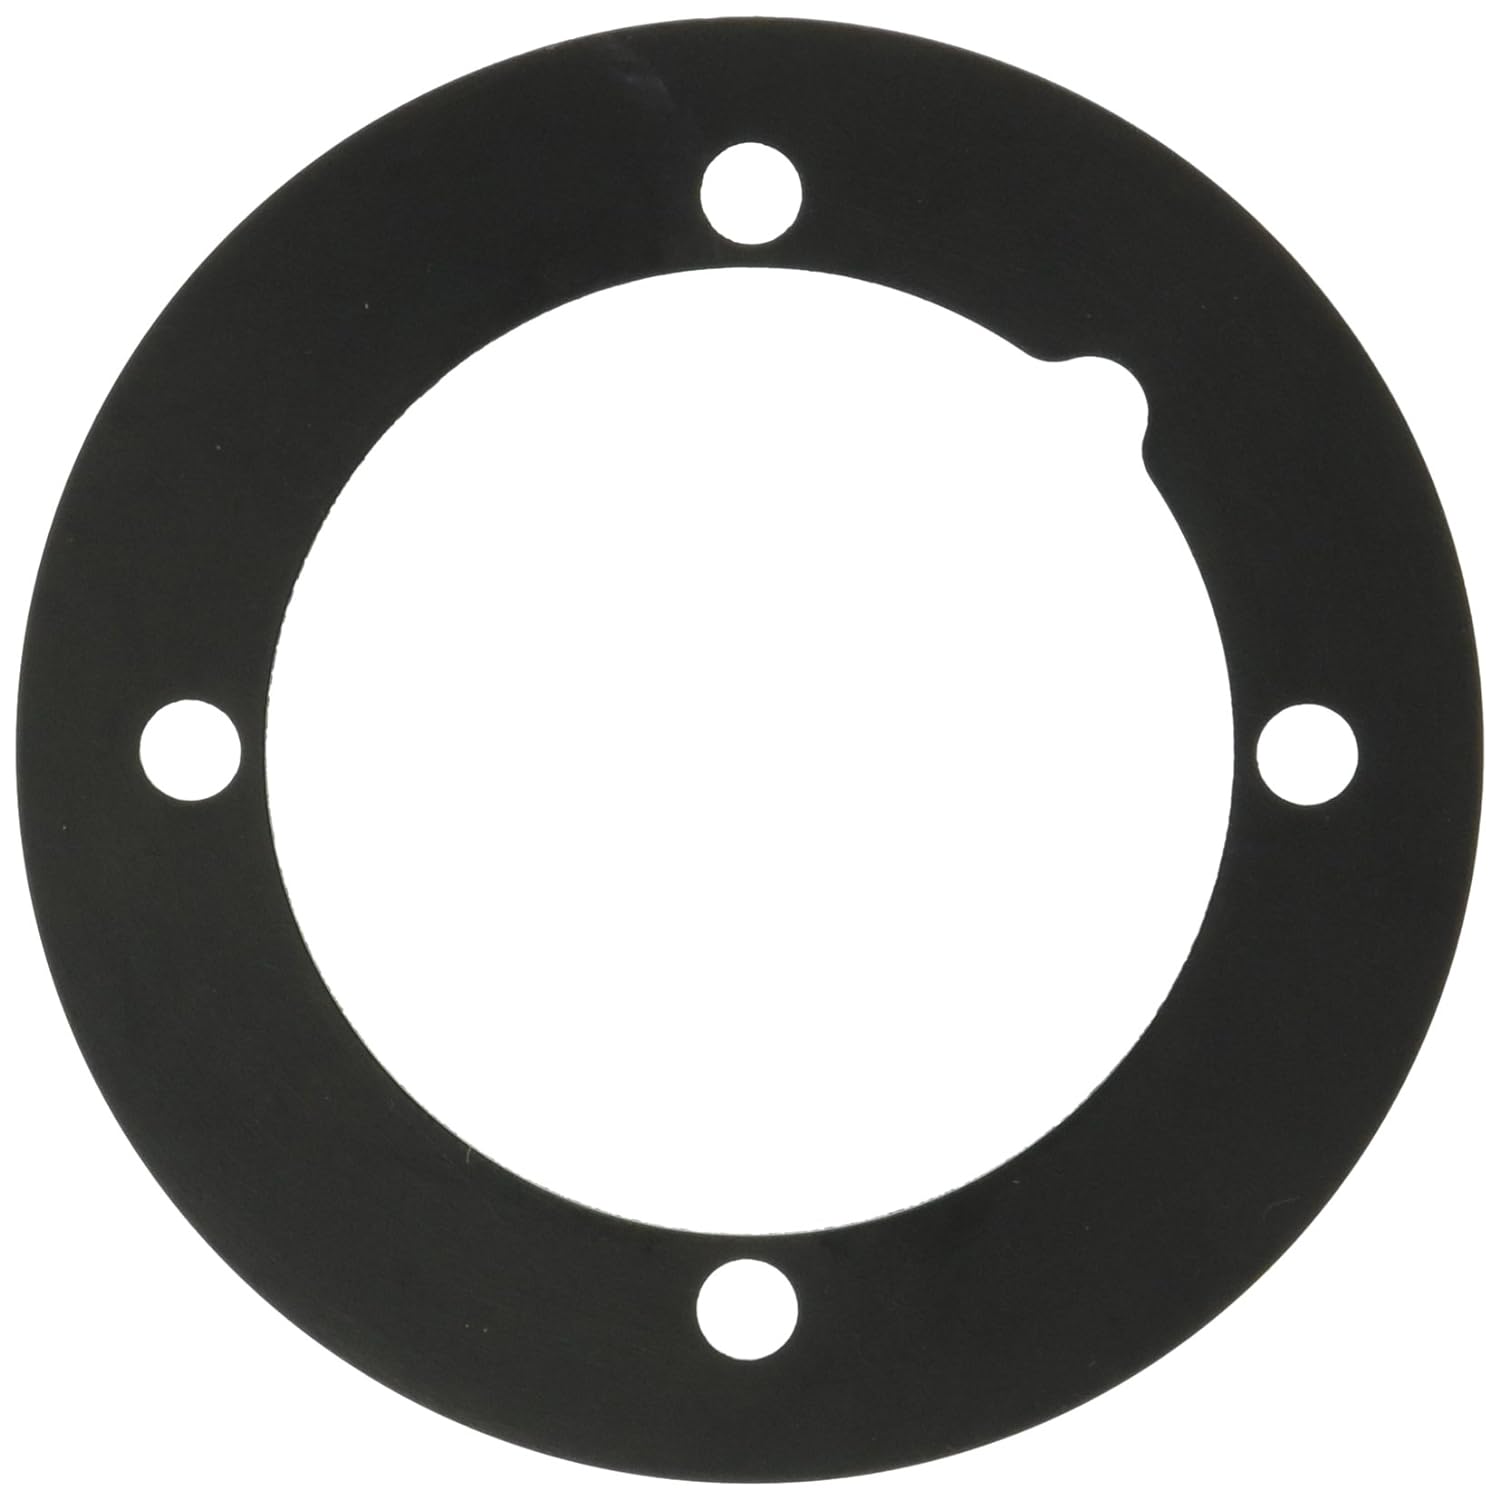 Hayward SPX1408C Gasket Replacement for Hayward Fittings